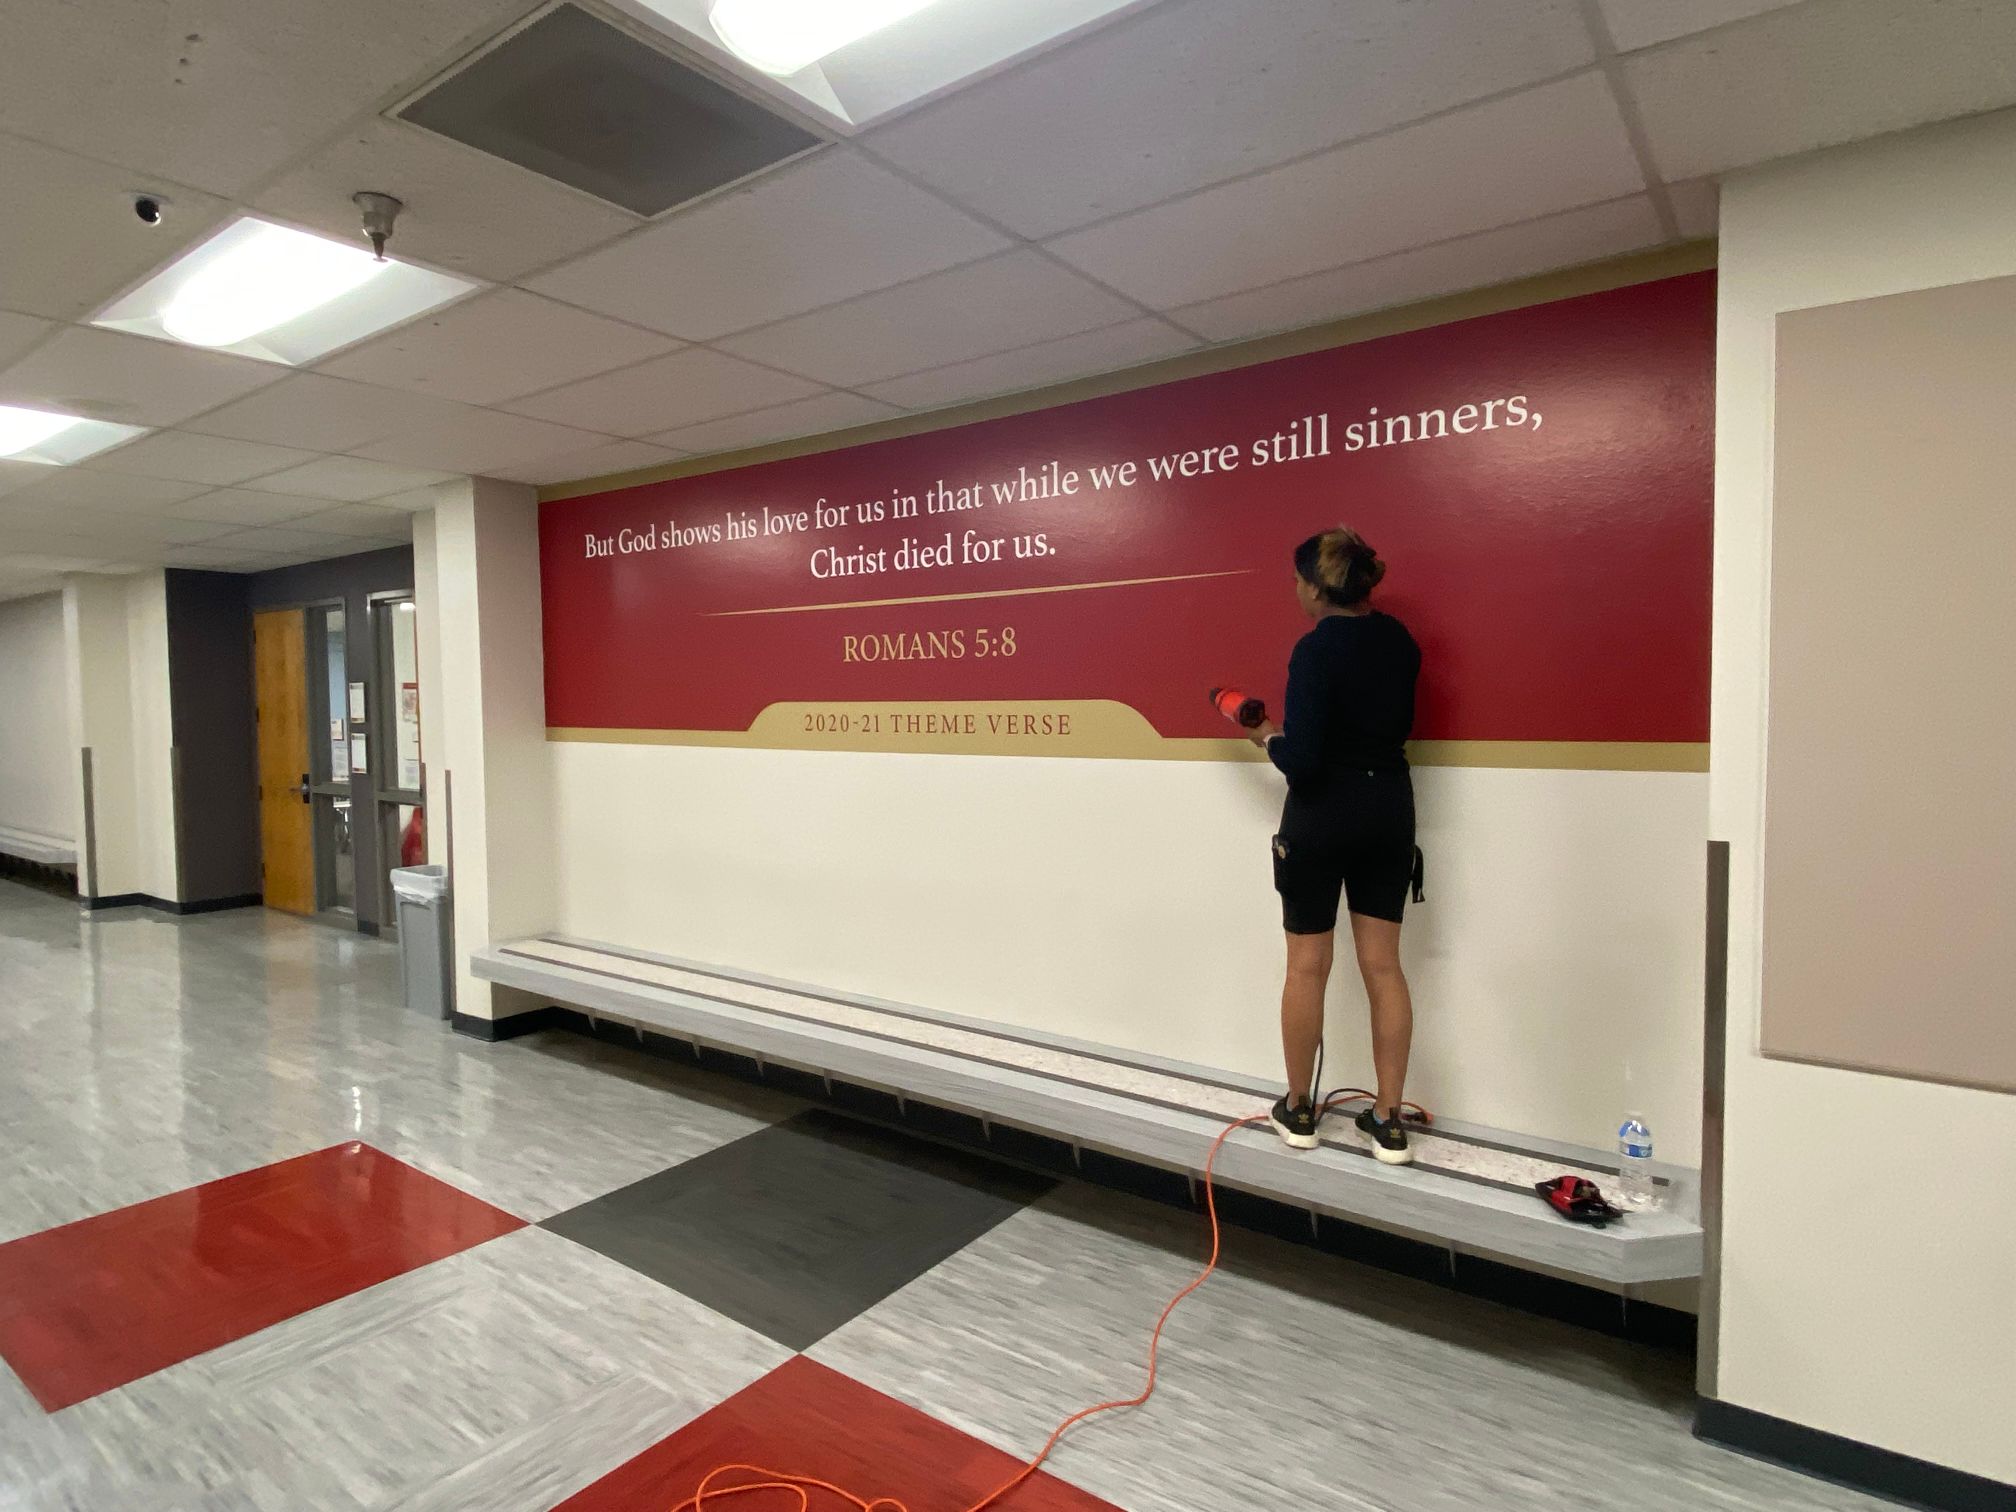 Wall Murals and Graphics for Churches and Schools in Orange County, CA Create Focus on Important Biblical Scriptures